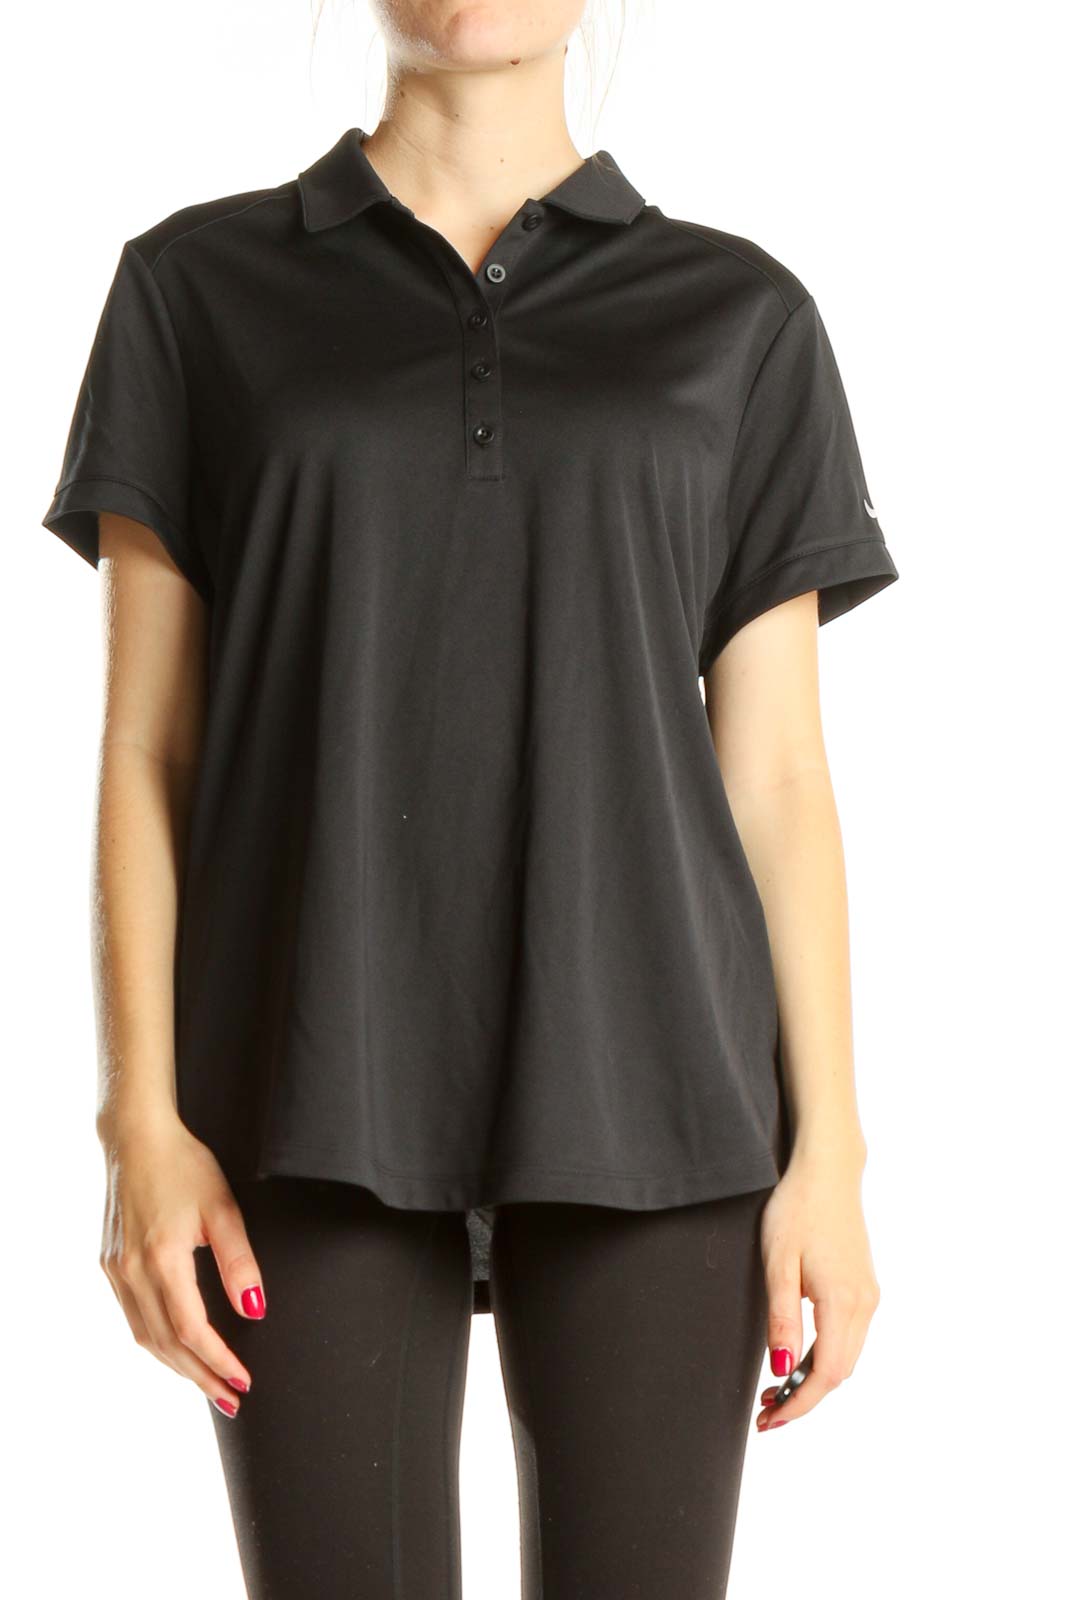 Black Activewear Polo Top Front